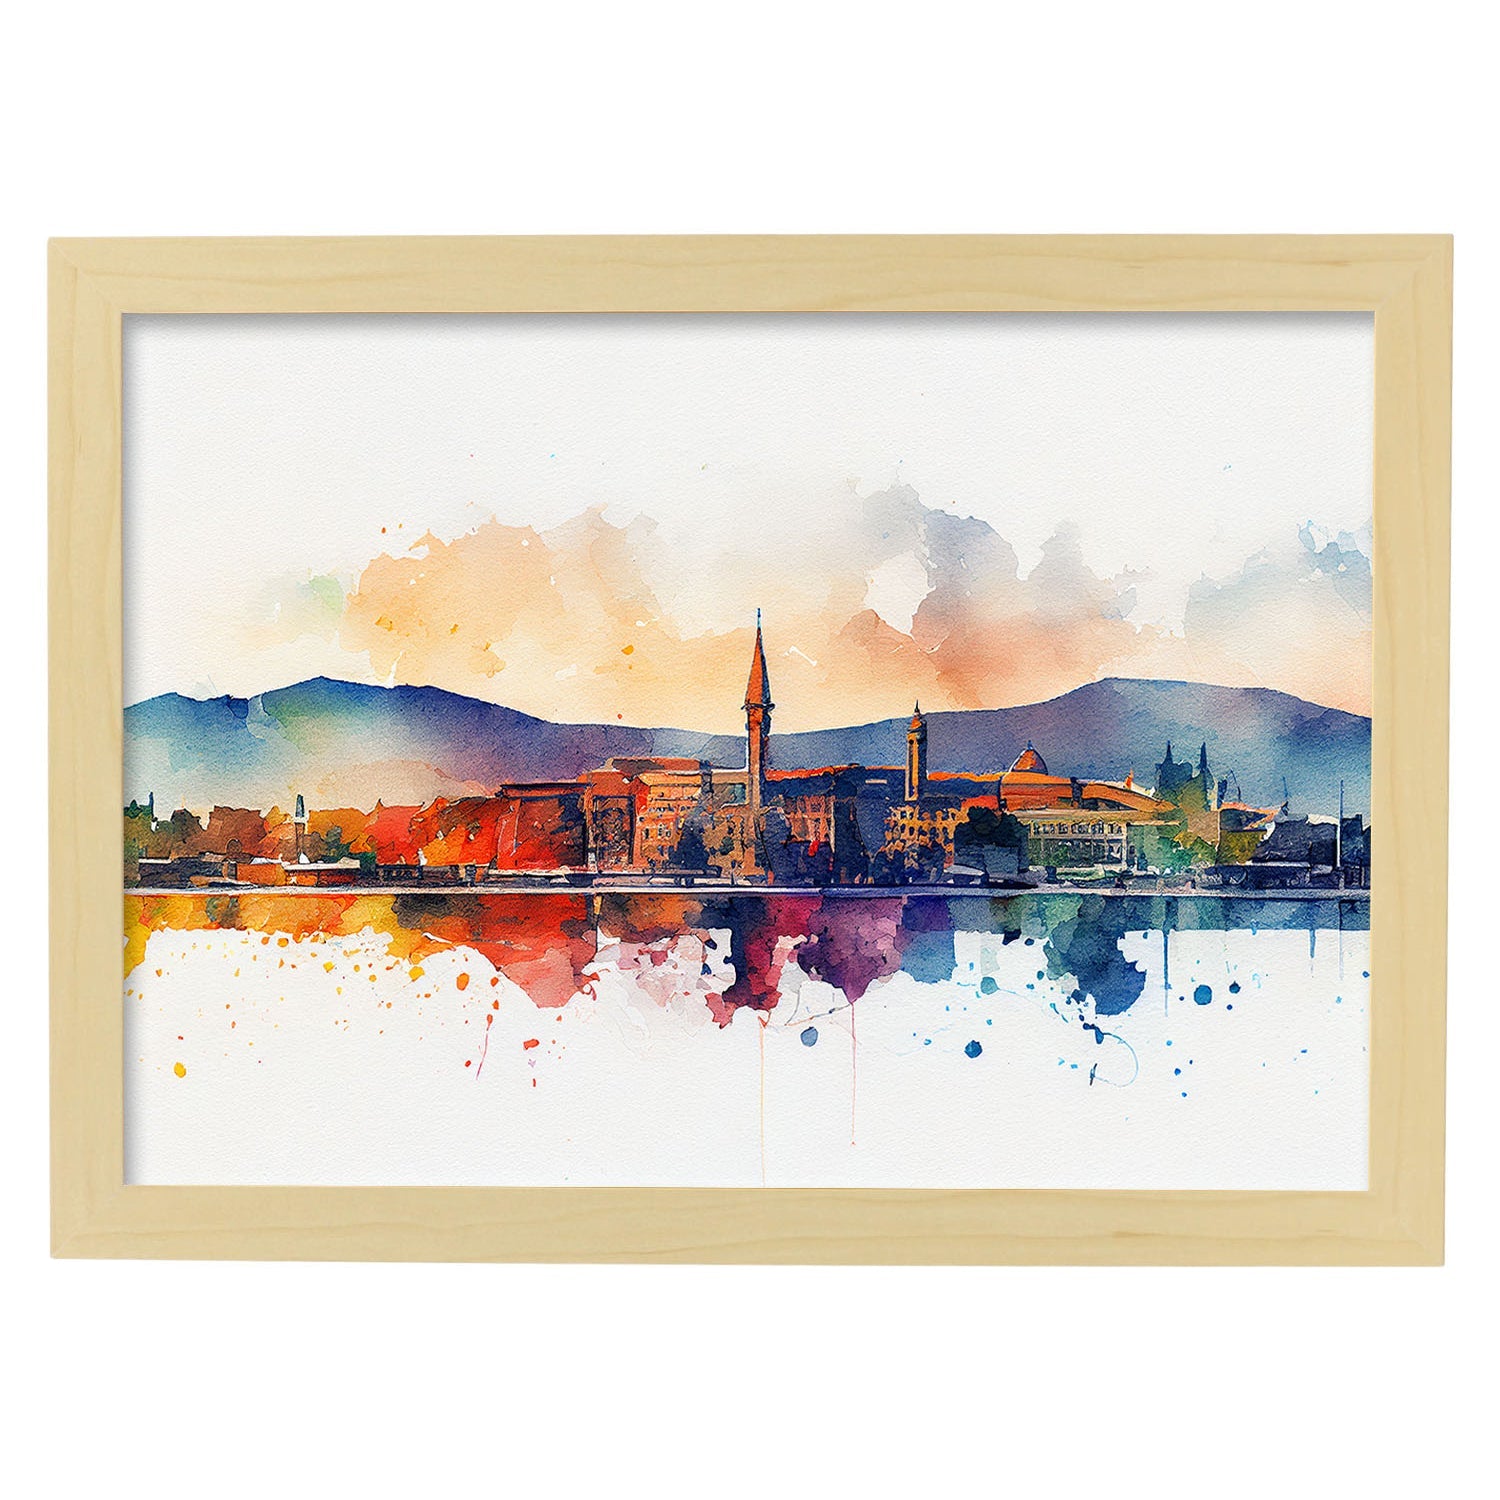 Nacnic watercolor of a skyline of the city of Geneva_2. Aesthetic Wall Art Prints for Bedroom or Living Room Design.-Artwork-Nacnic-A4-Marco Madera Clara-Nacnic Estudio SL